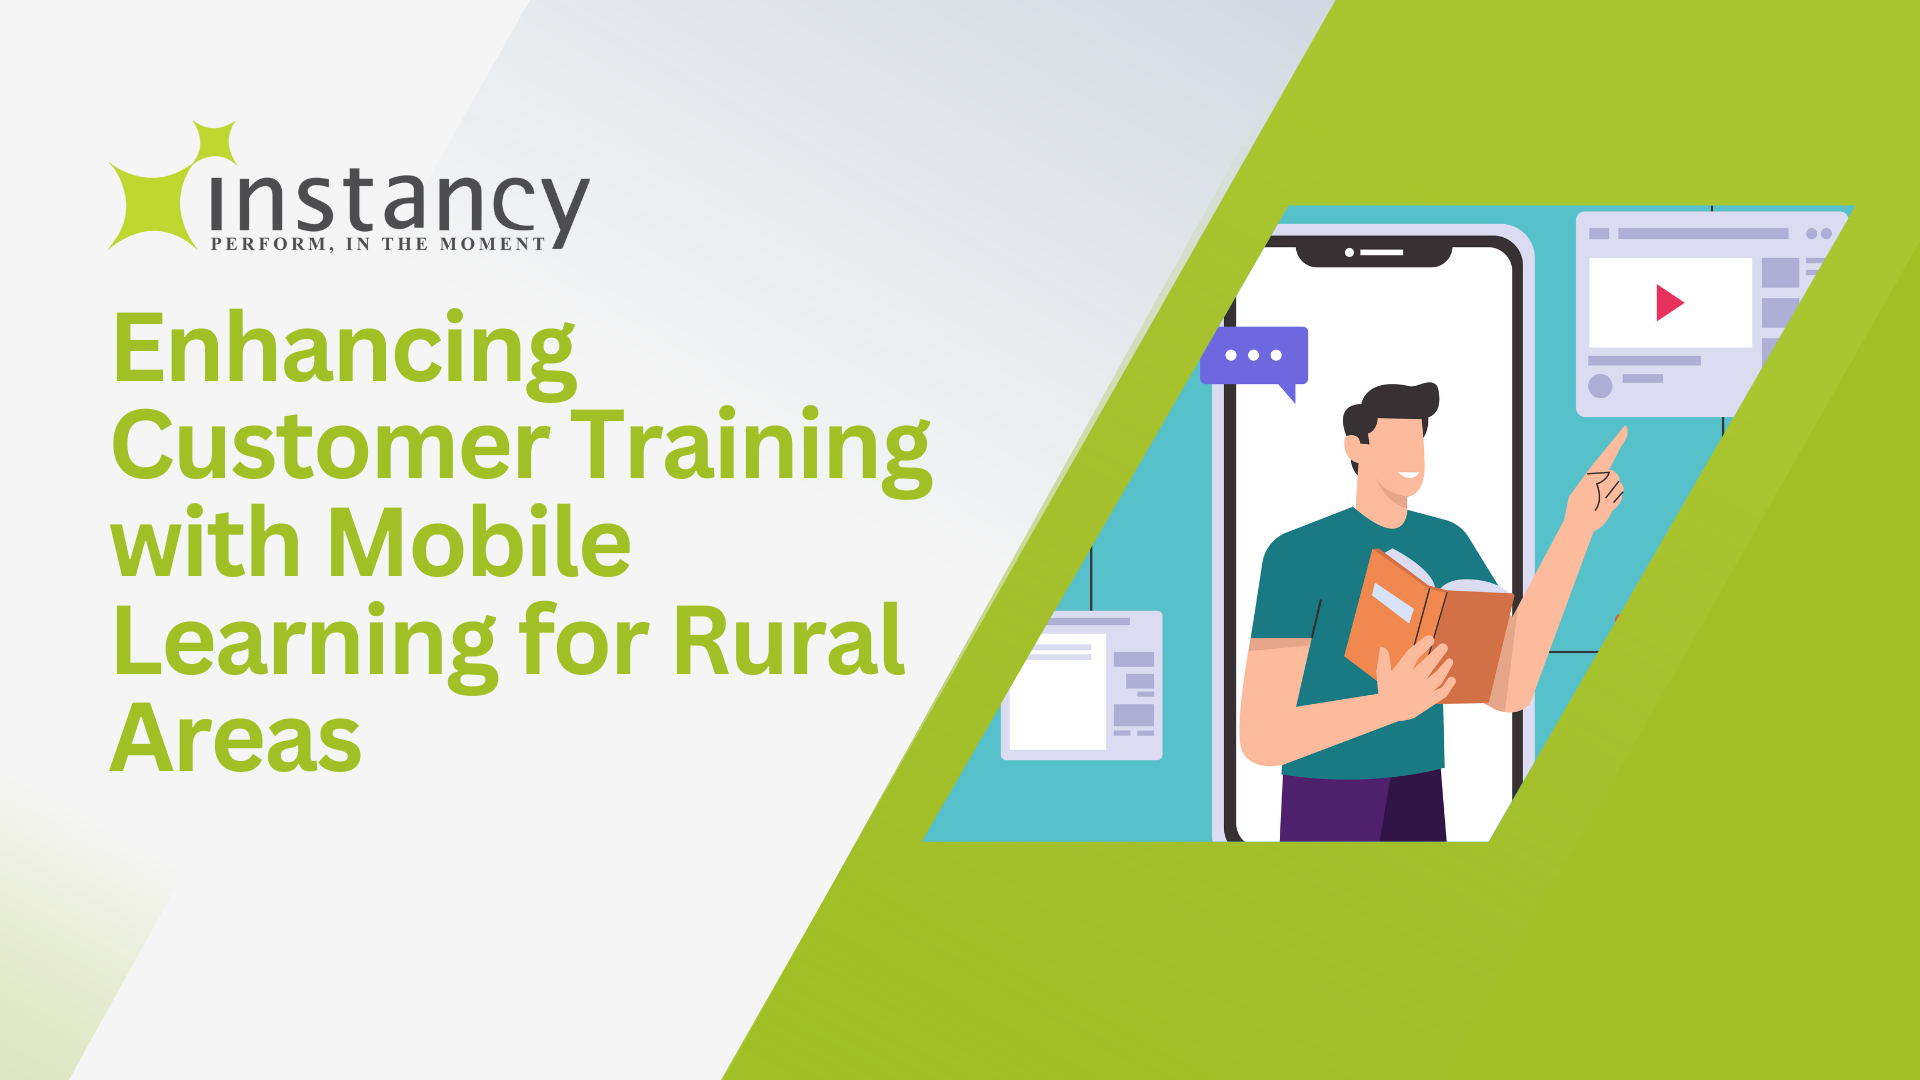 Customer training with mobile learning